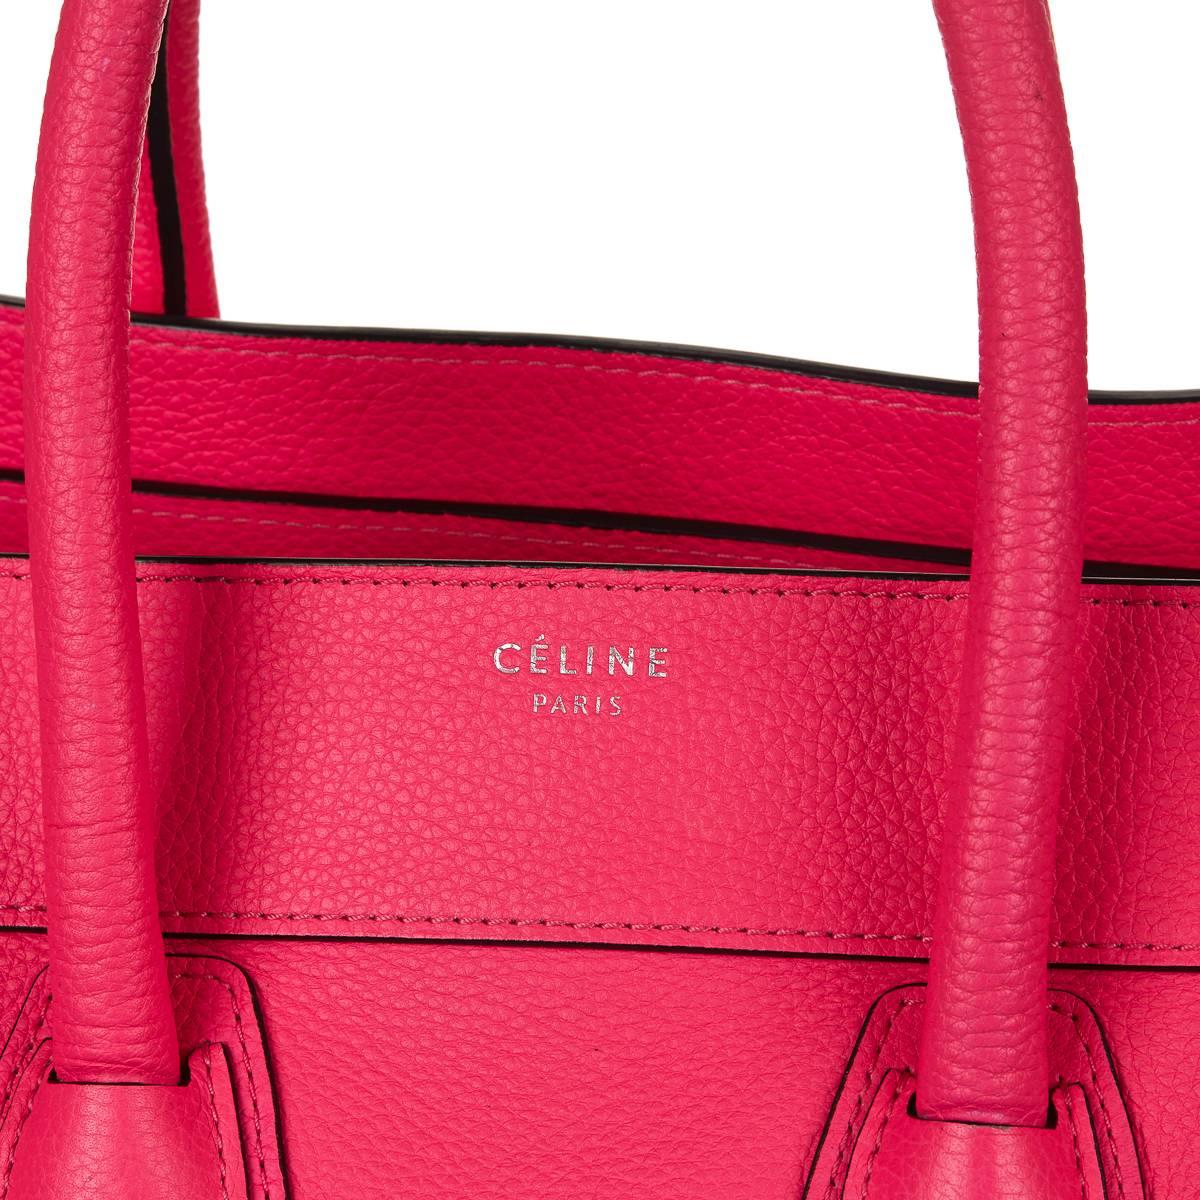 2010s Céline Neon Pink Drummed Leather Mini Luggage Tote 3